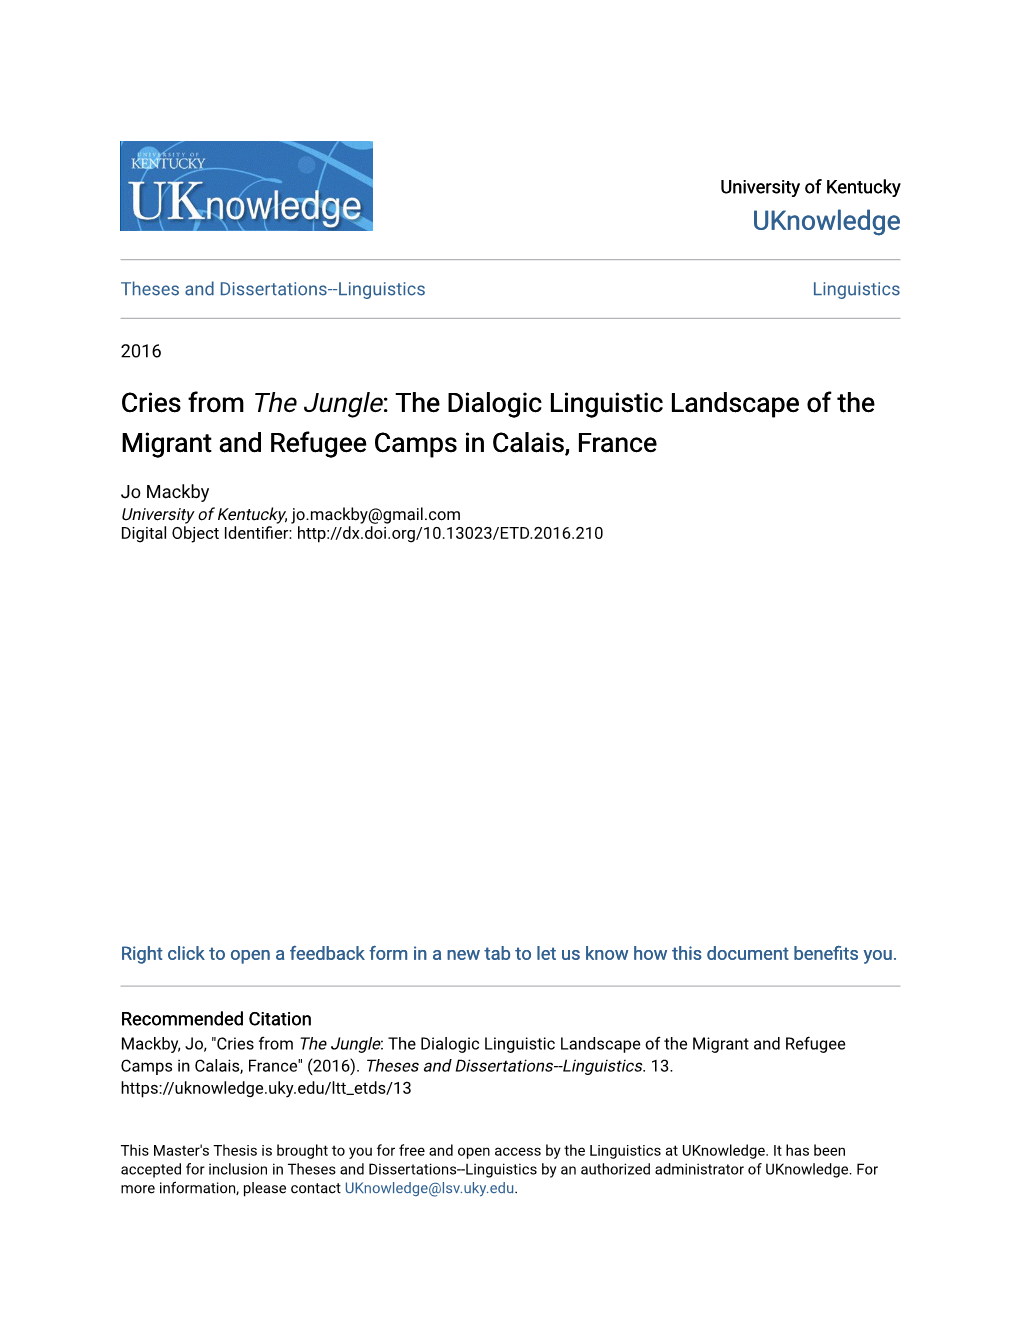 The Dialogic Linguistic Landscape of the Migrant and Refugee Camps in Calais, France